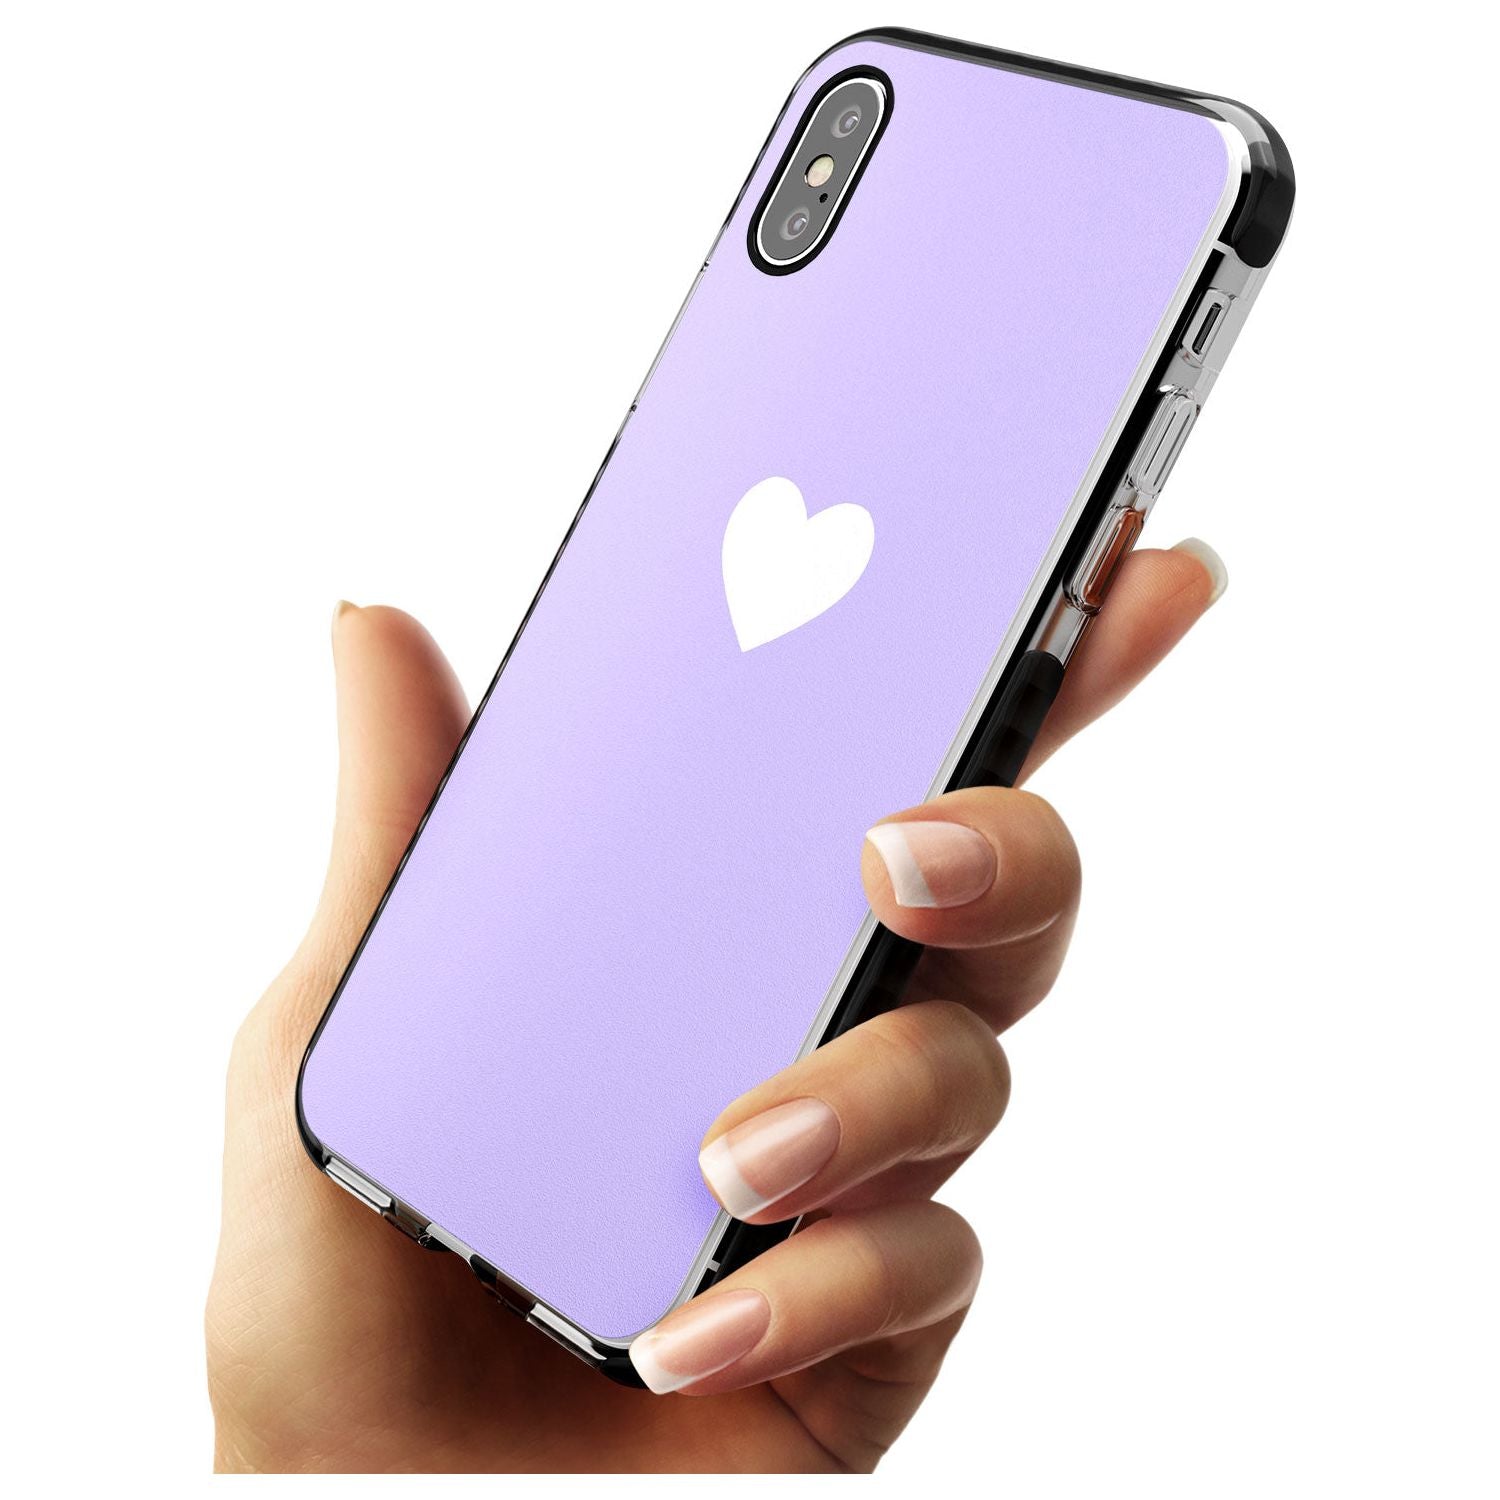 Single Heart White & Pale Purple Black Impact Phone Case for iPhone X XS Max XR